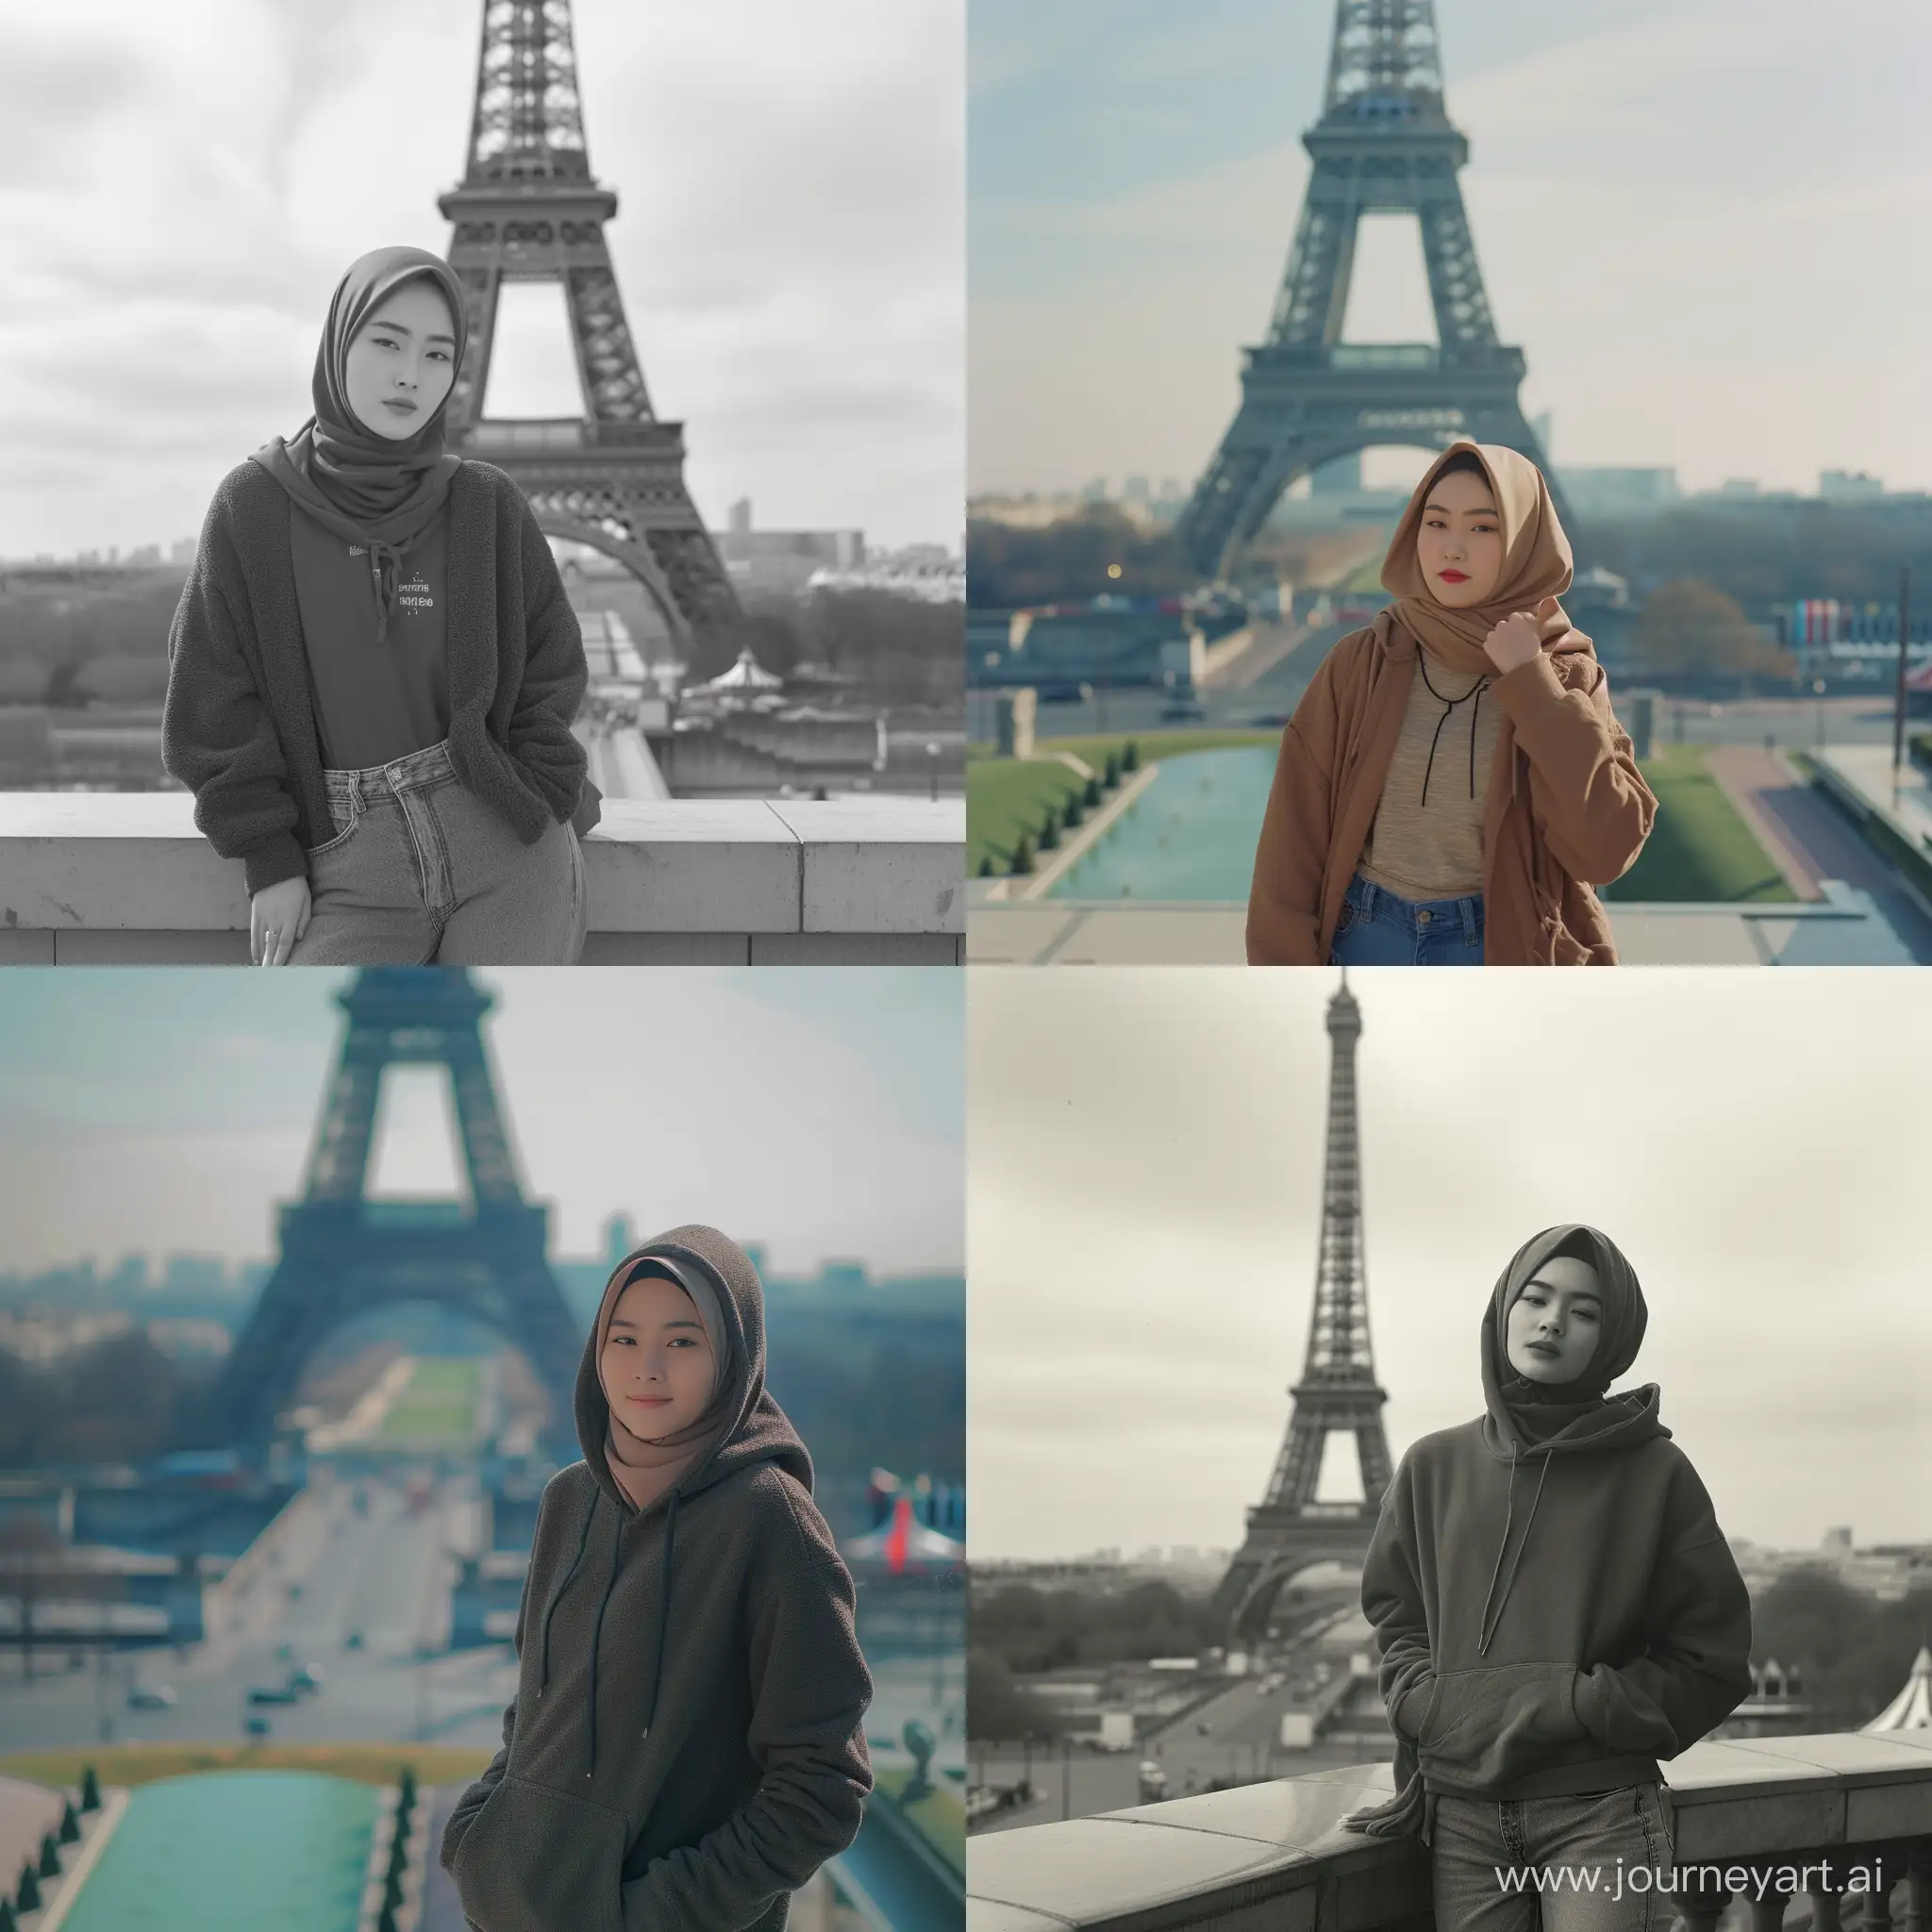 Javanese-Indonesian-Woman-Poses-by-Eiffel-Tower-in-Winter-Attire